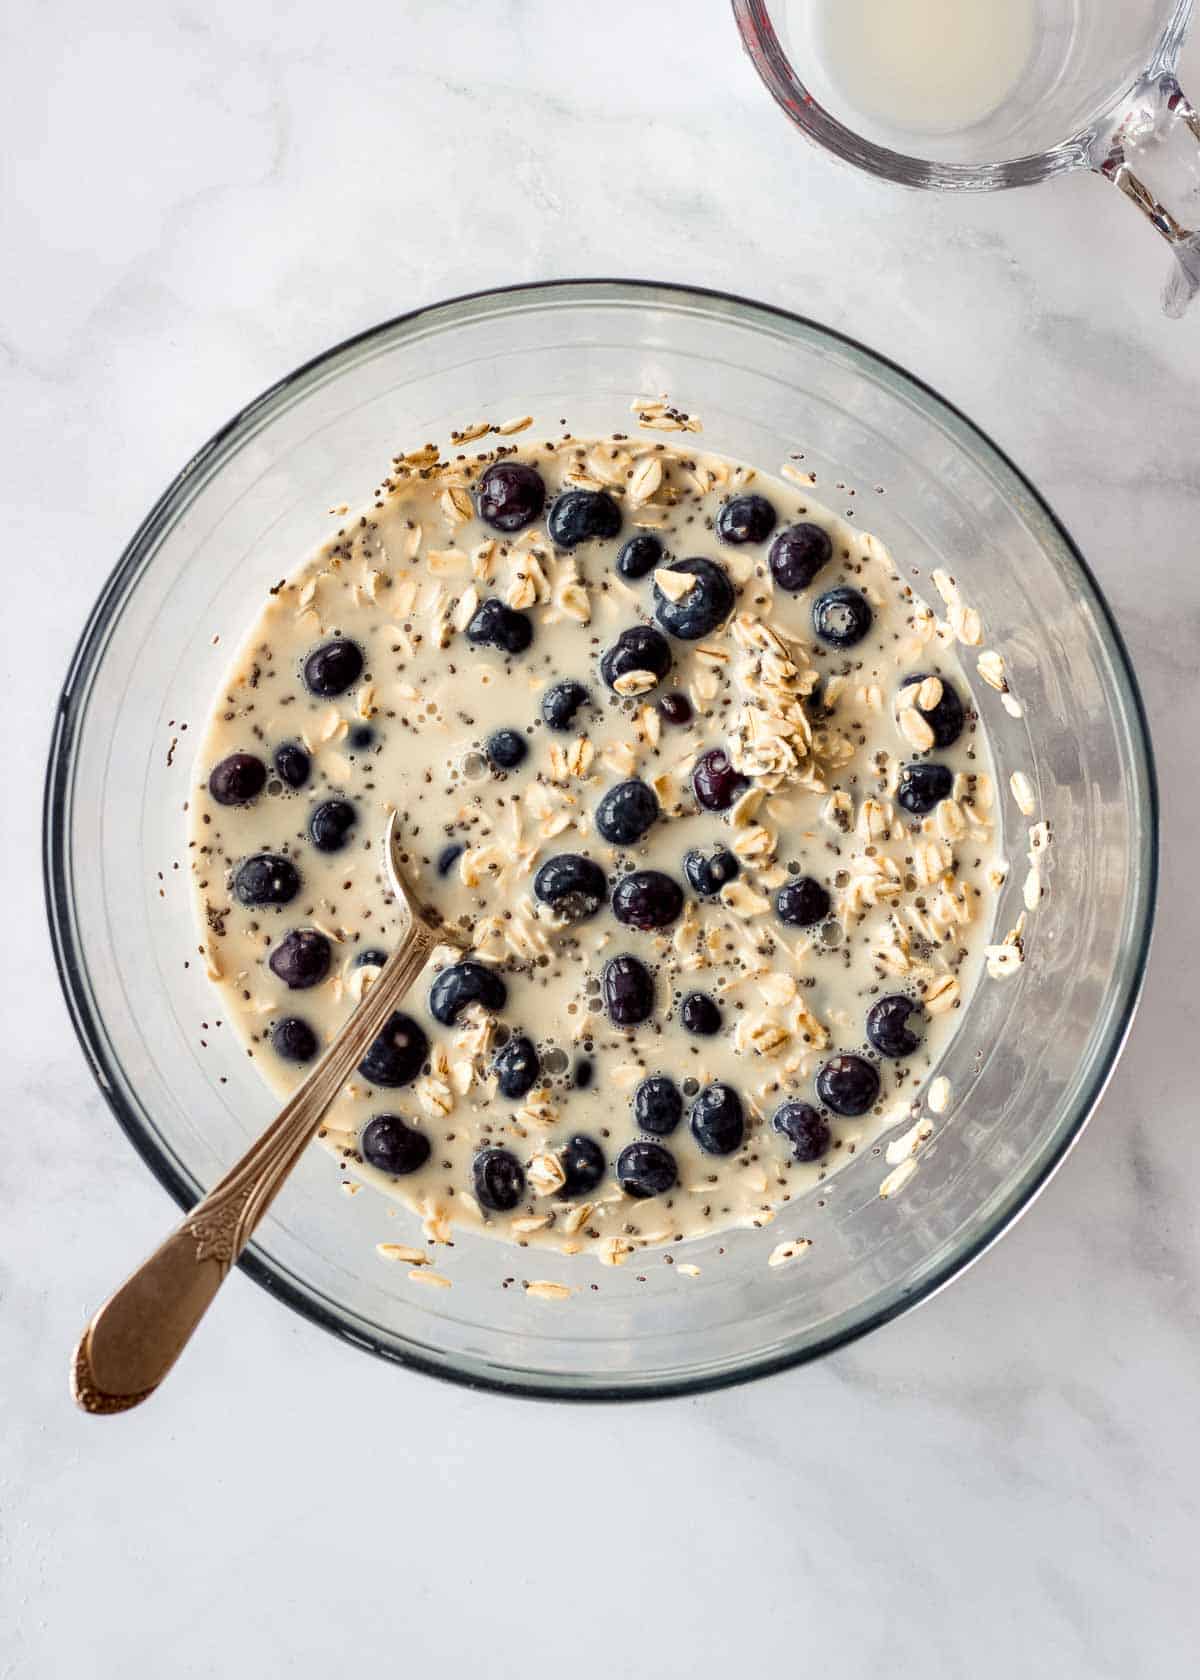 A large glass bowl of oats, blueberries, chia seeds, maple syrup and milk.